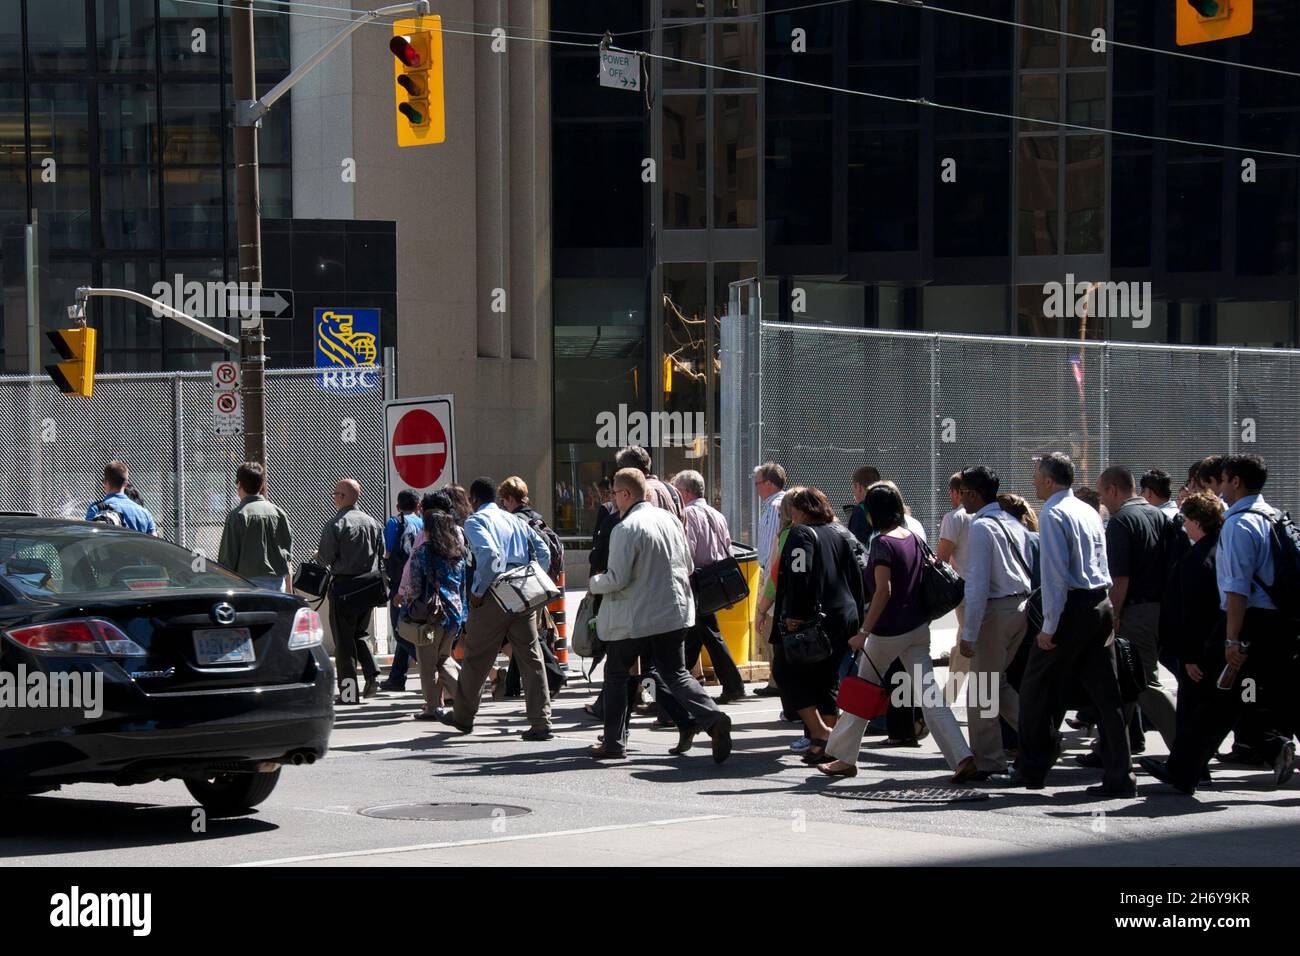 Toronto, Ontario, Kanada - 06/15/2010: Crowd Control Barriers use as part of Crown Management Planning in G20 Stockfoto